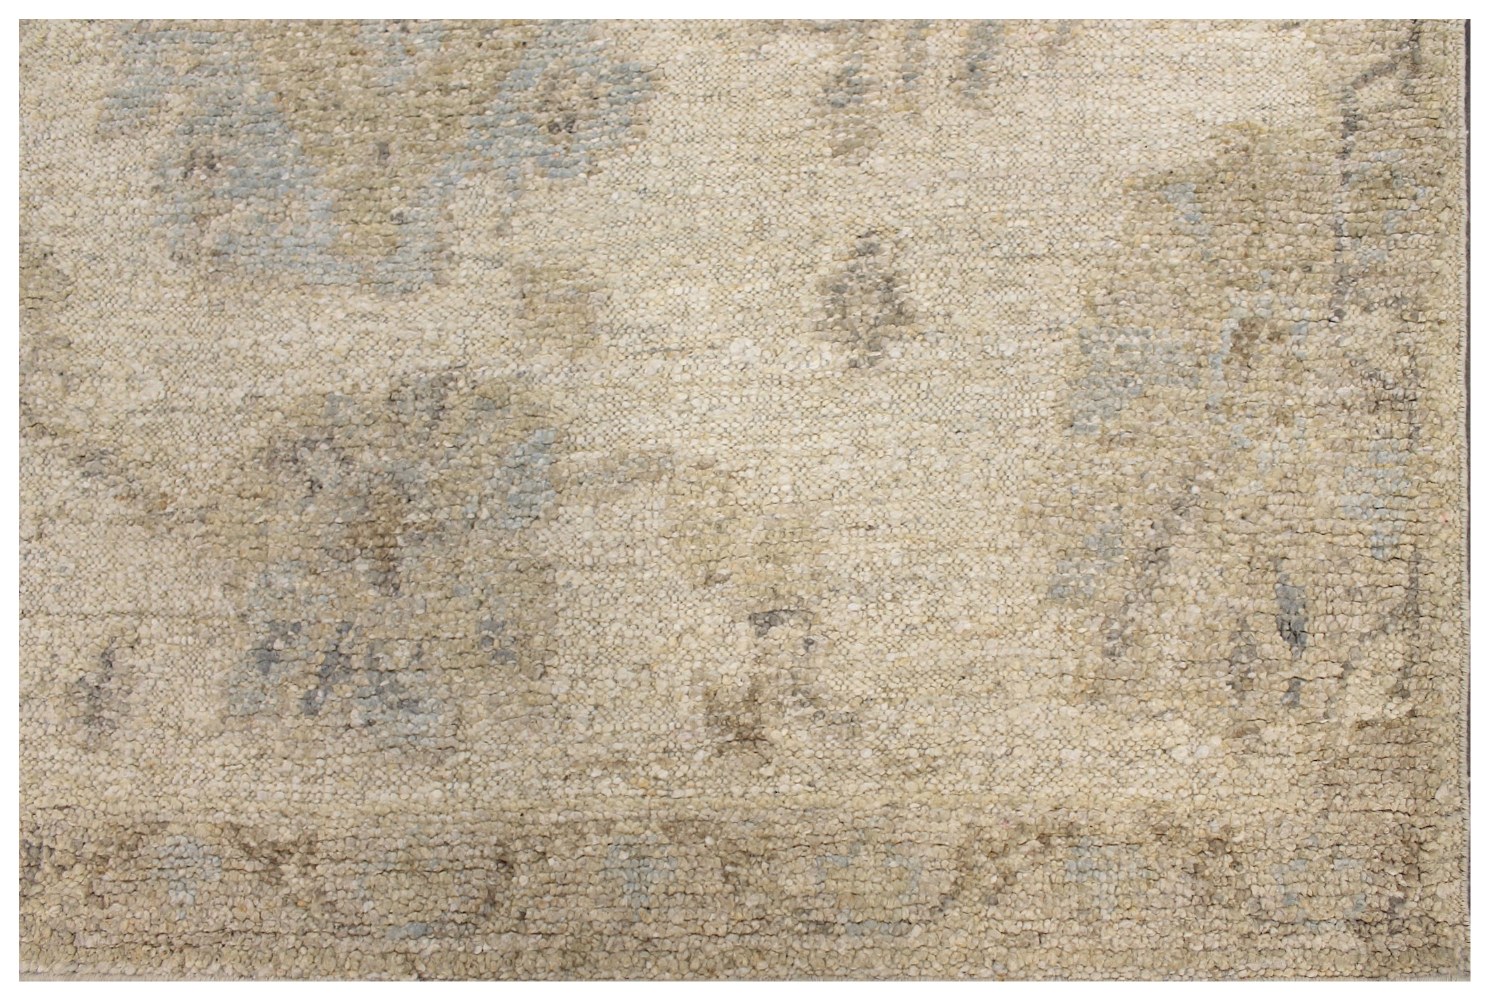 OVERSIZE Oushak Hand Knotted Wool Area Rug - MR028646